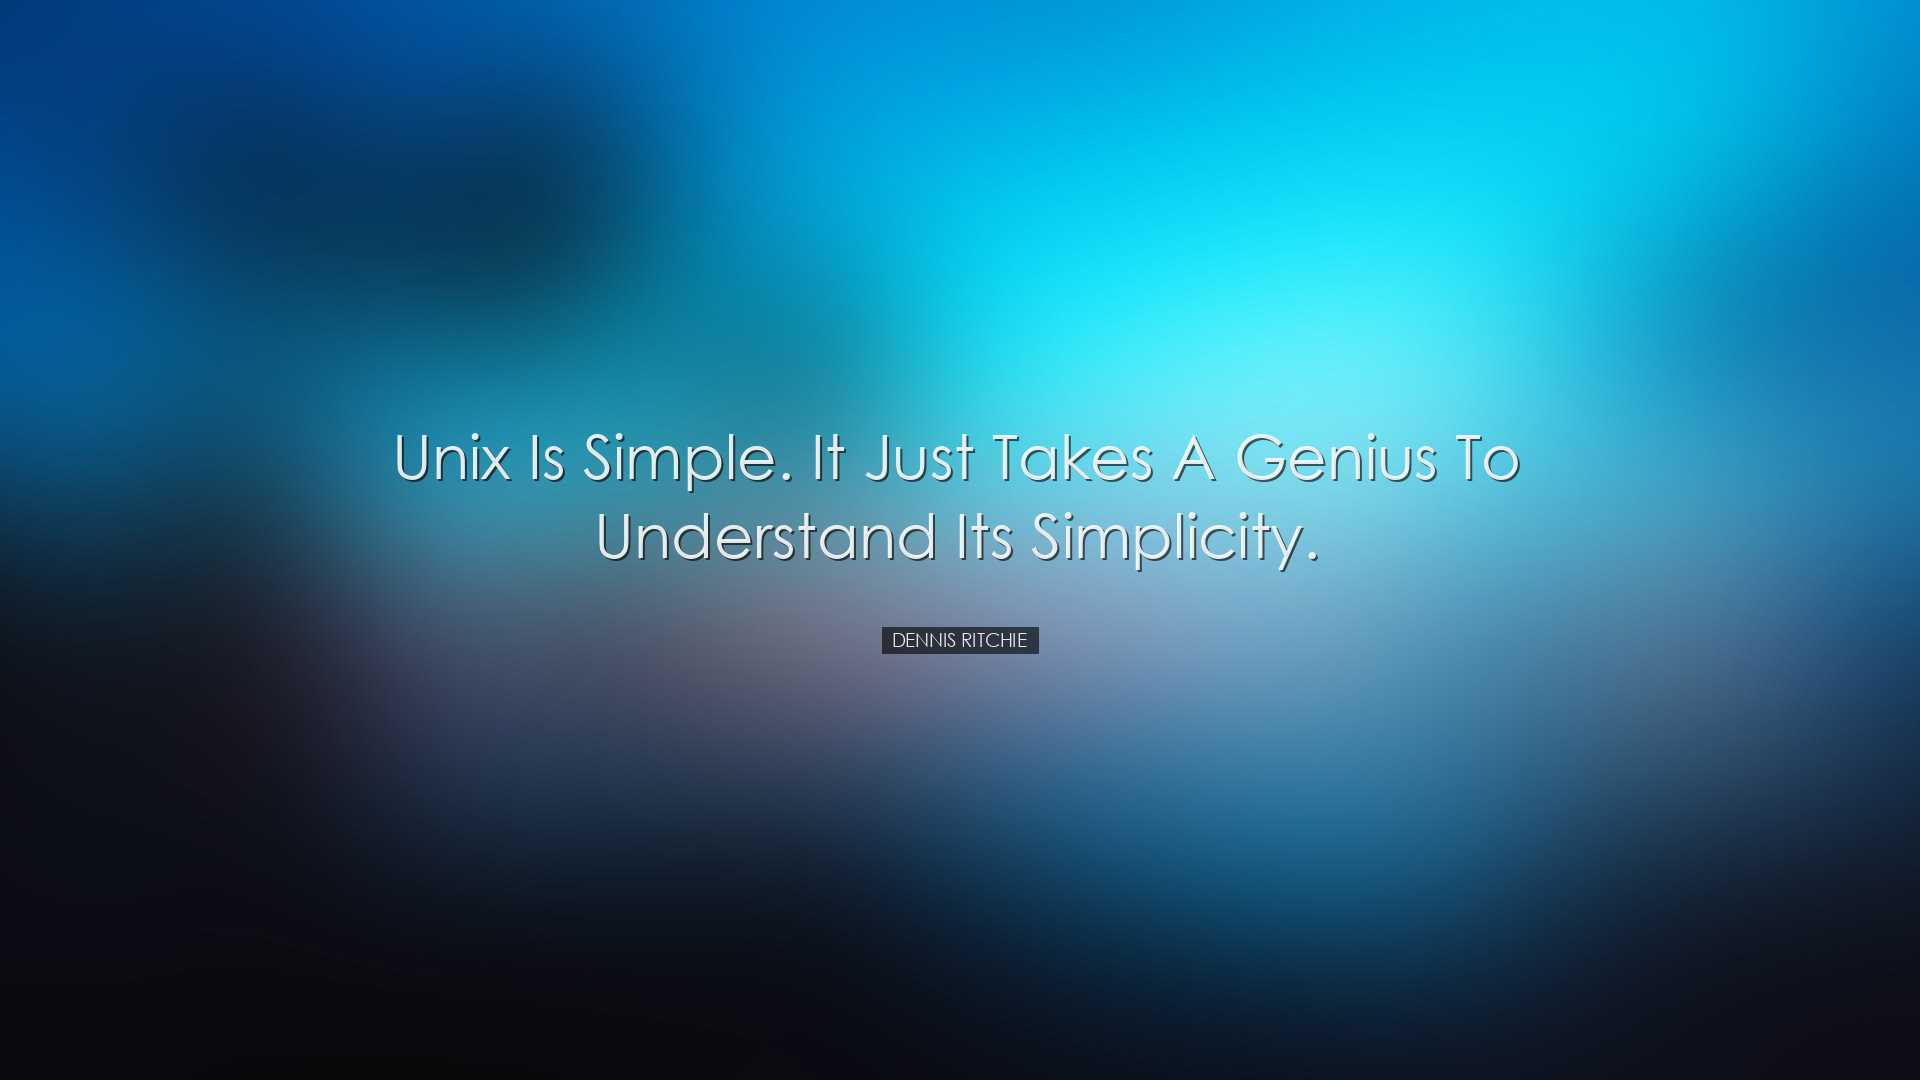 Unix is simple. It just takes a genius to understand its simplicit